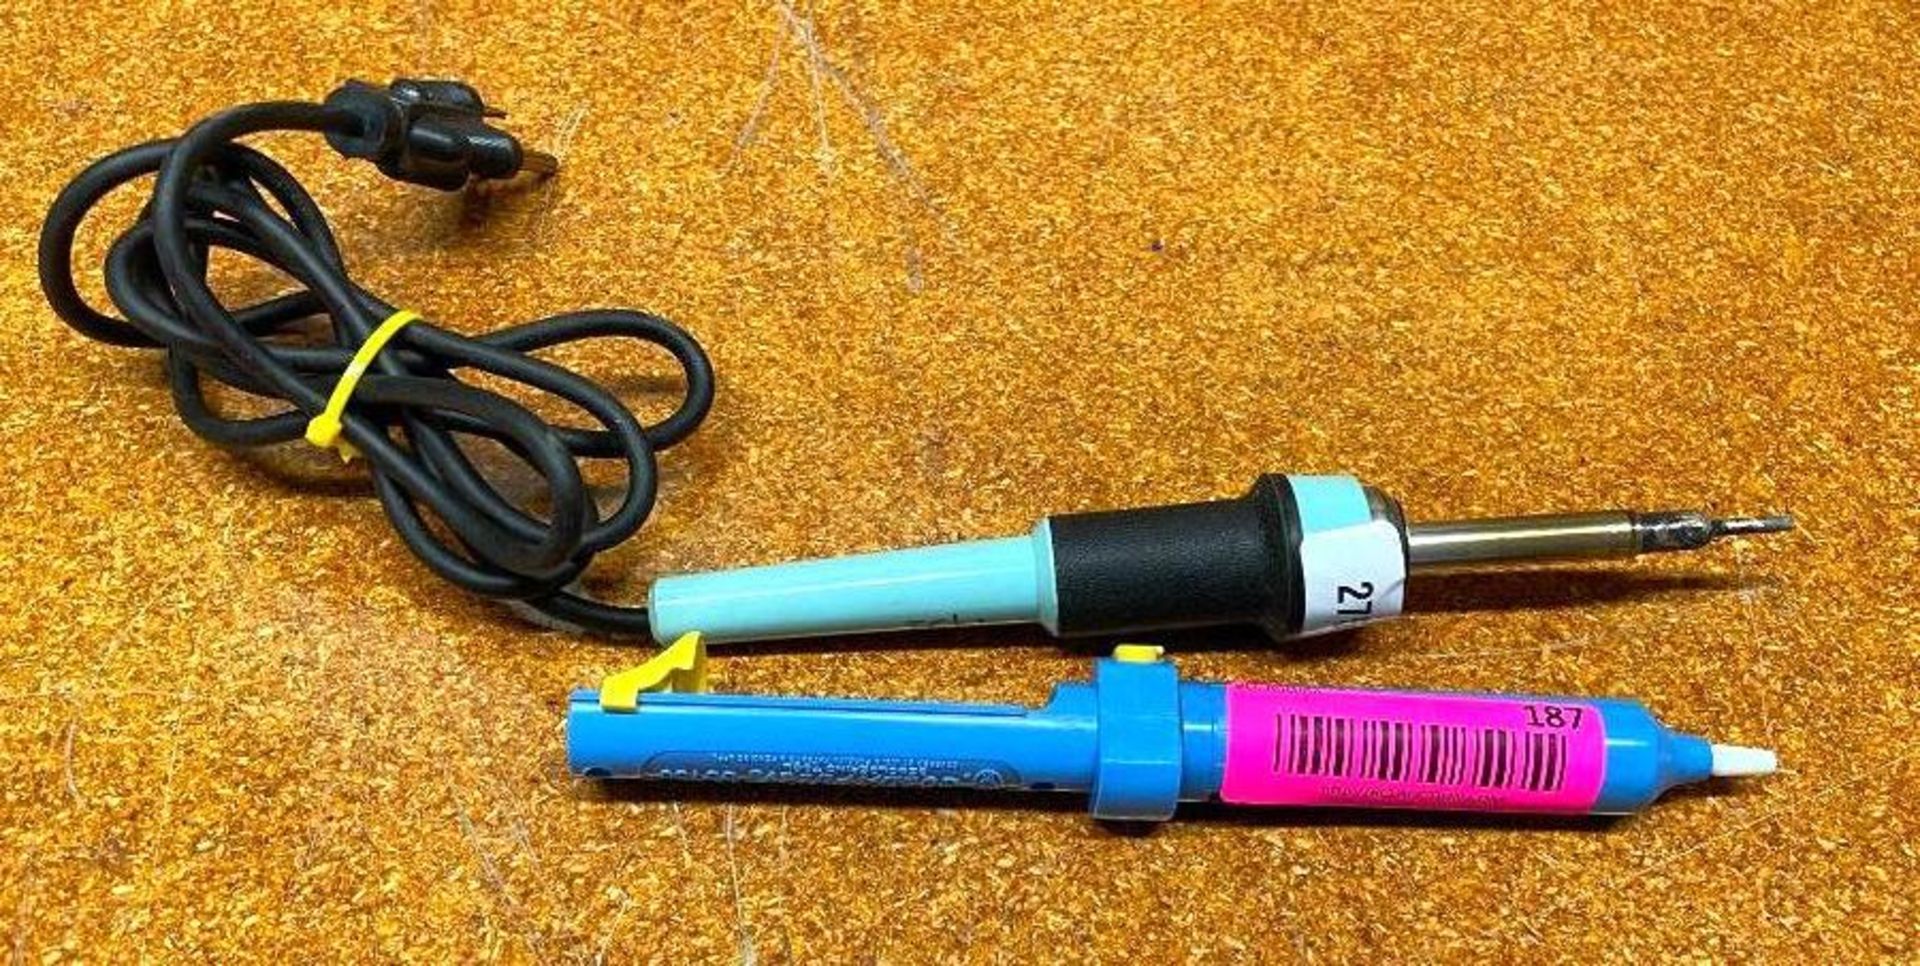 SOLDERING IRON BRAND/MODEL: JENSEN INFORMATION: WITH VACUUM SOLDER REMOVER QTY: 1